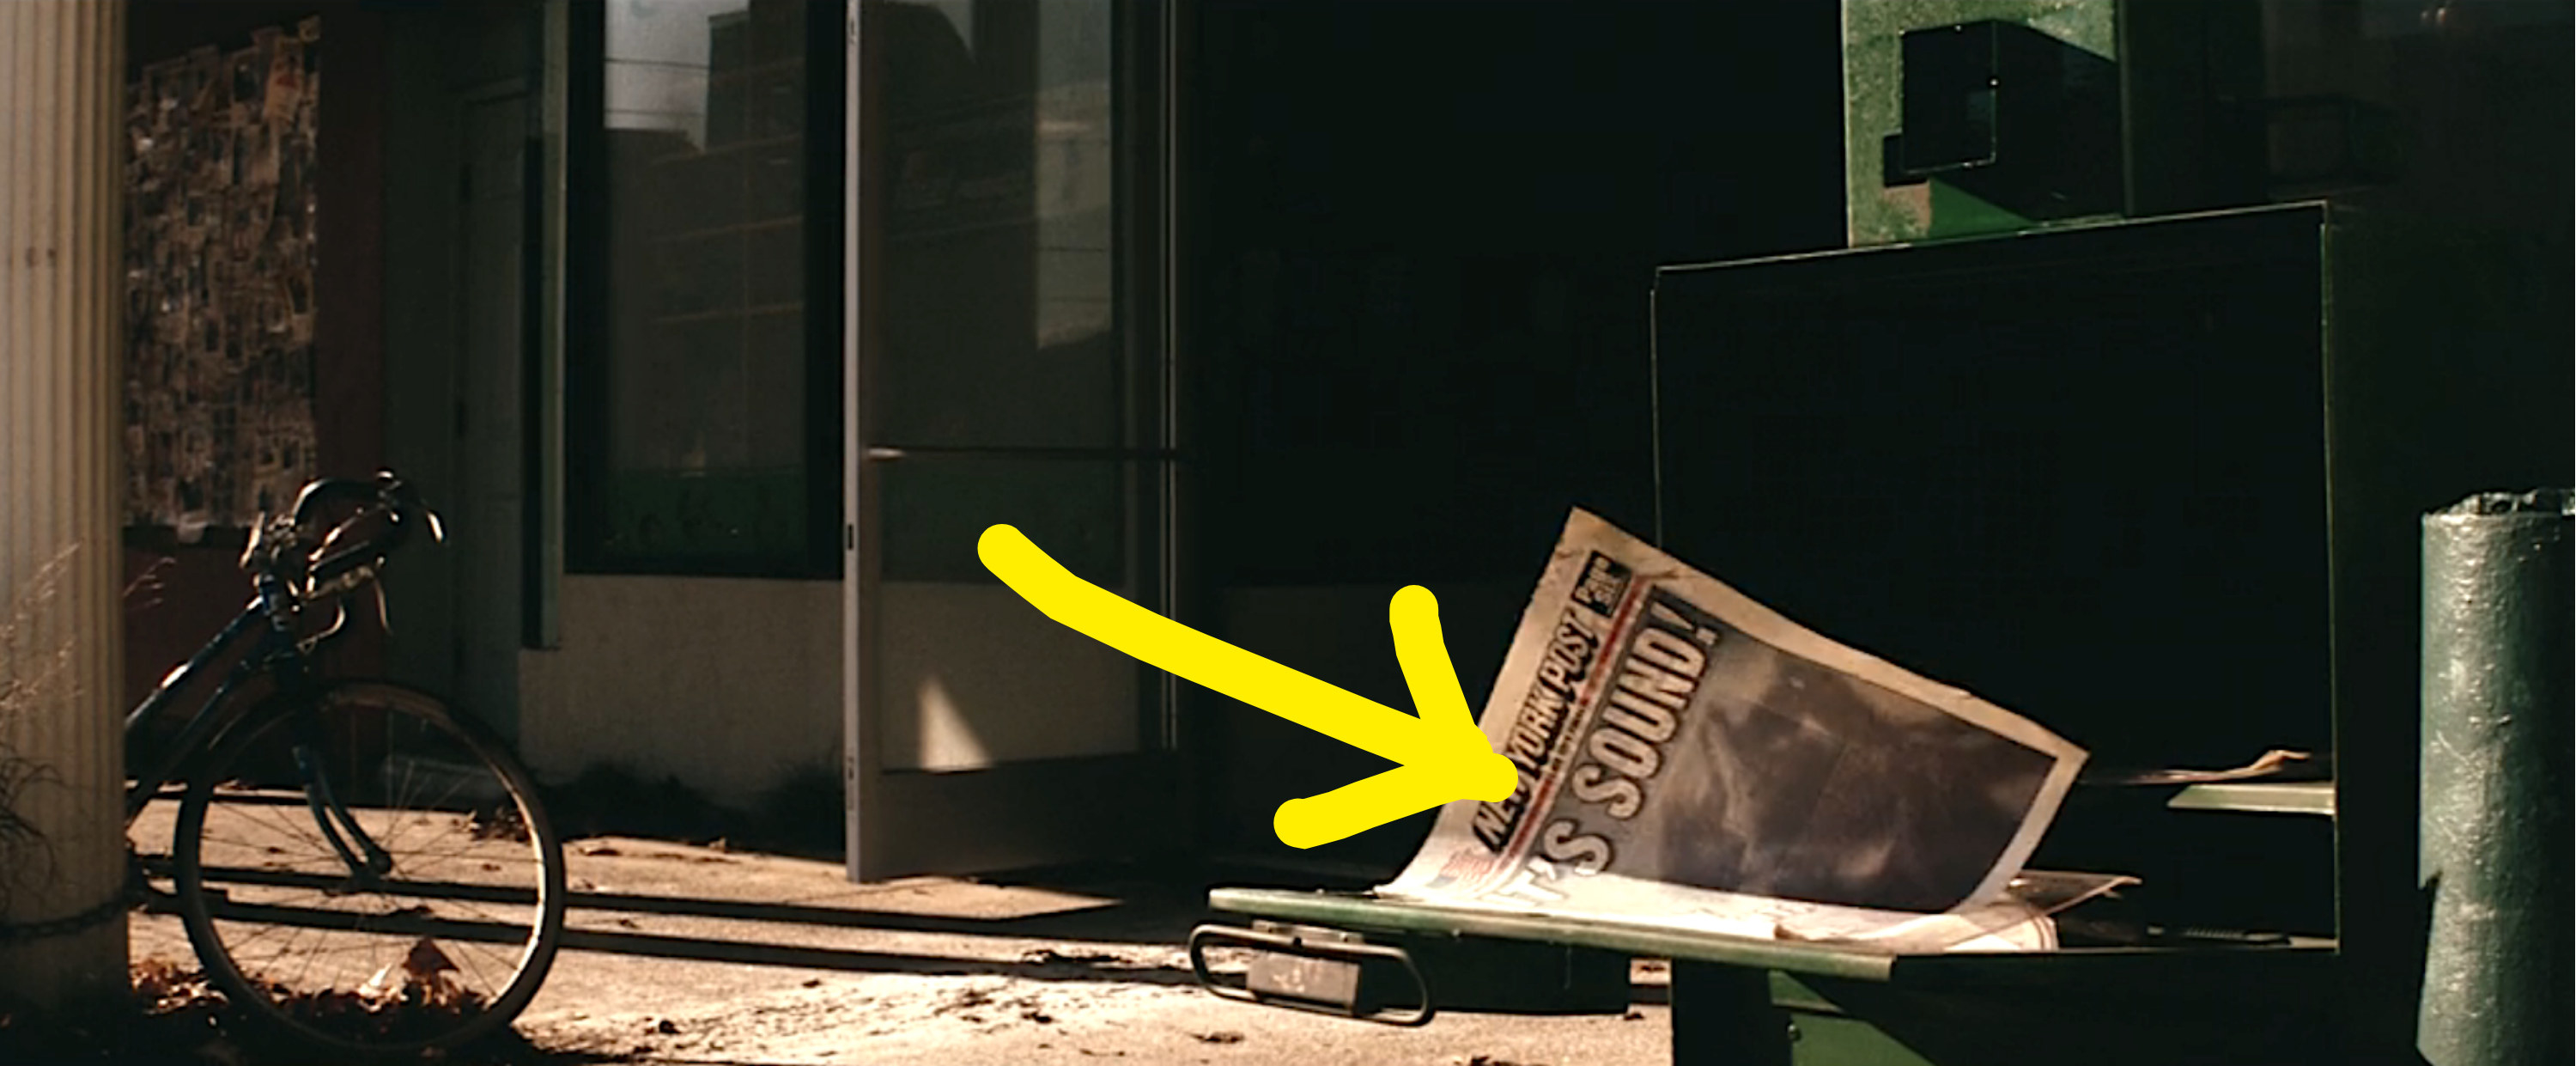 arrow pointing to the newspaper